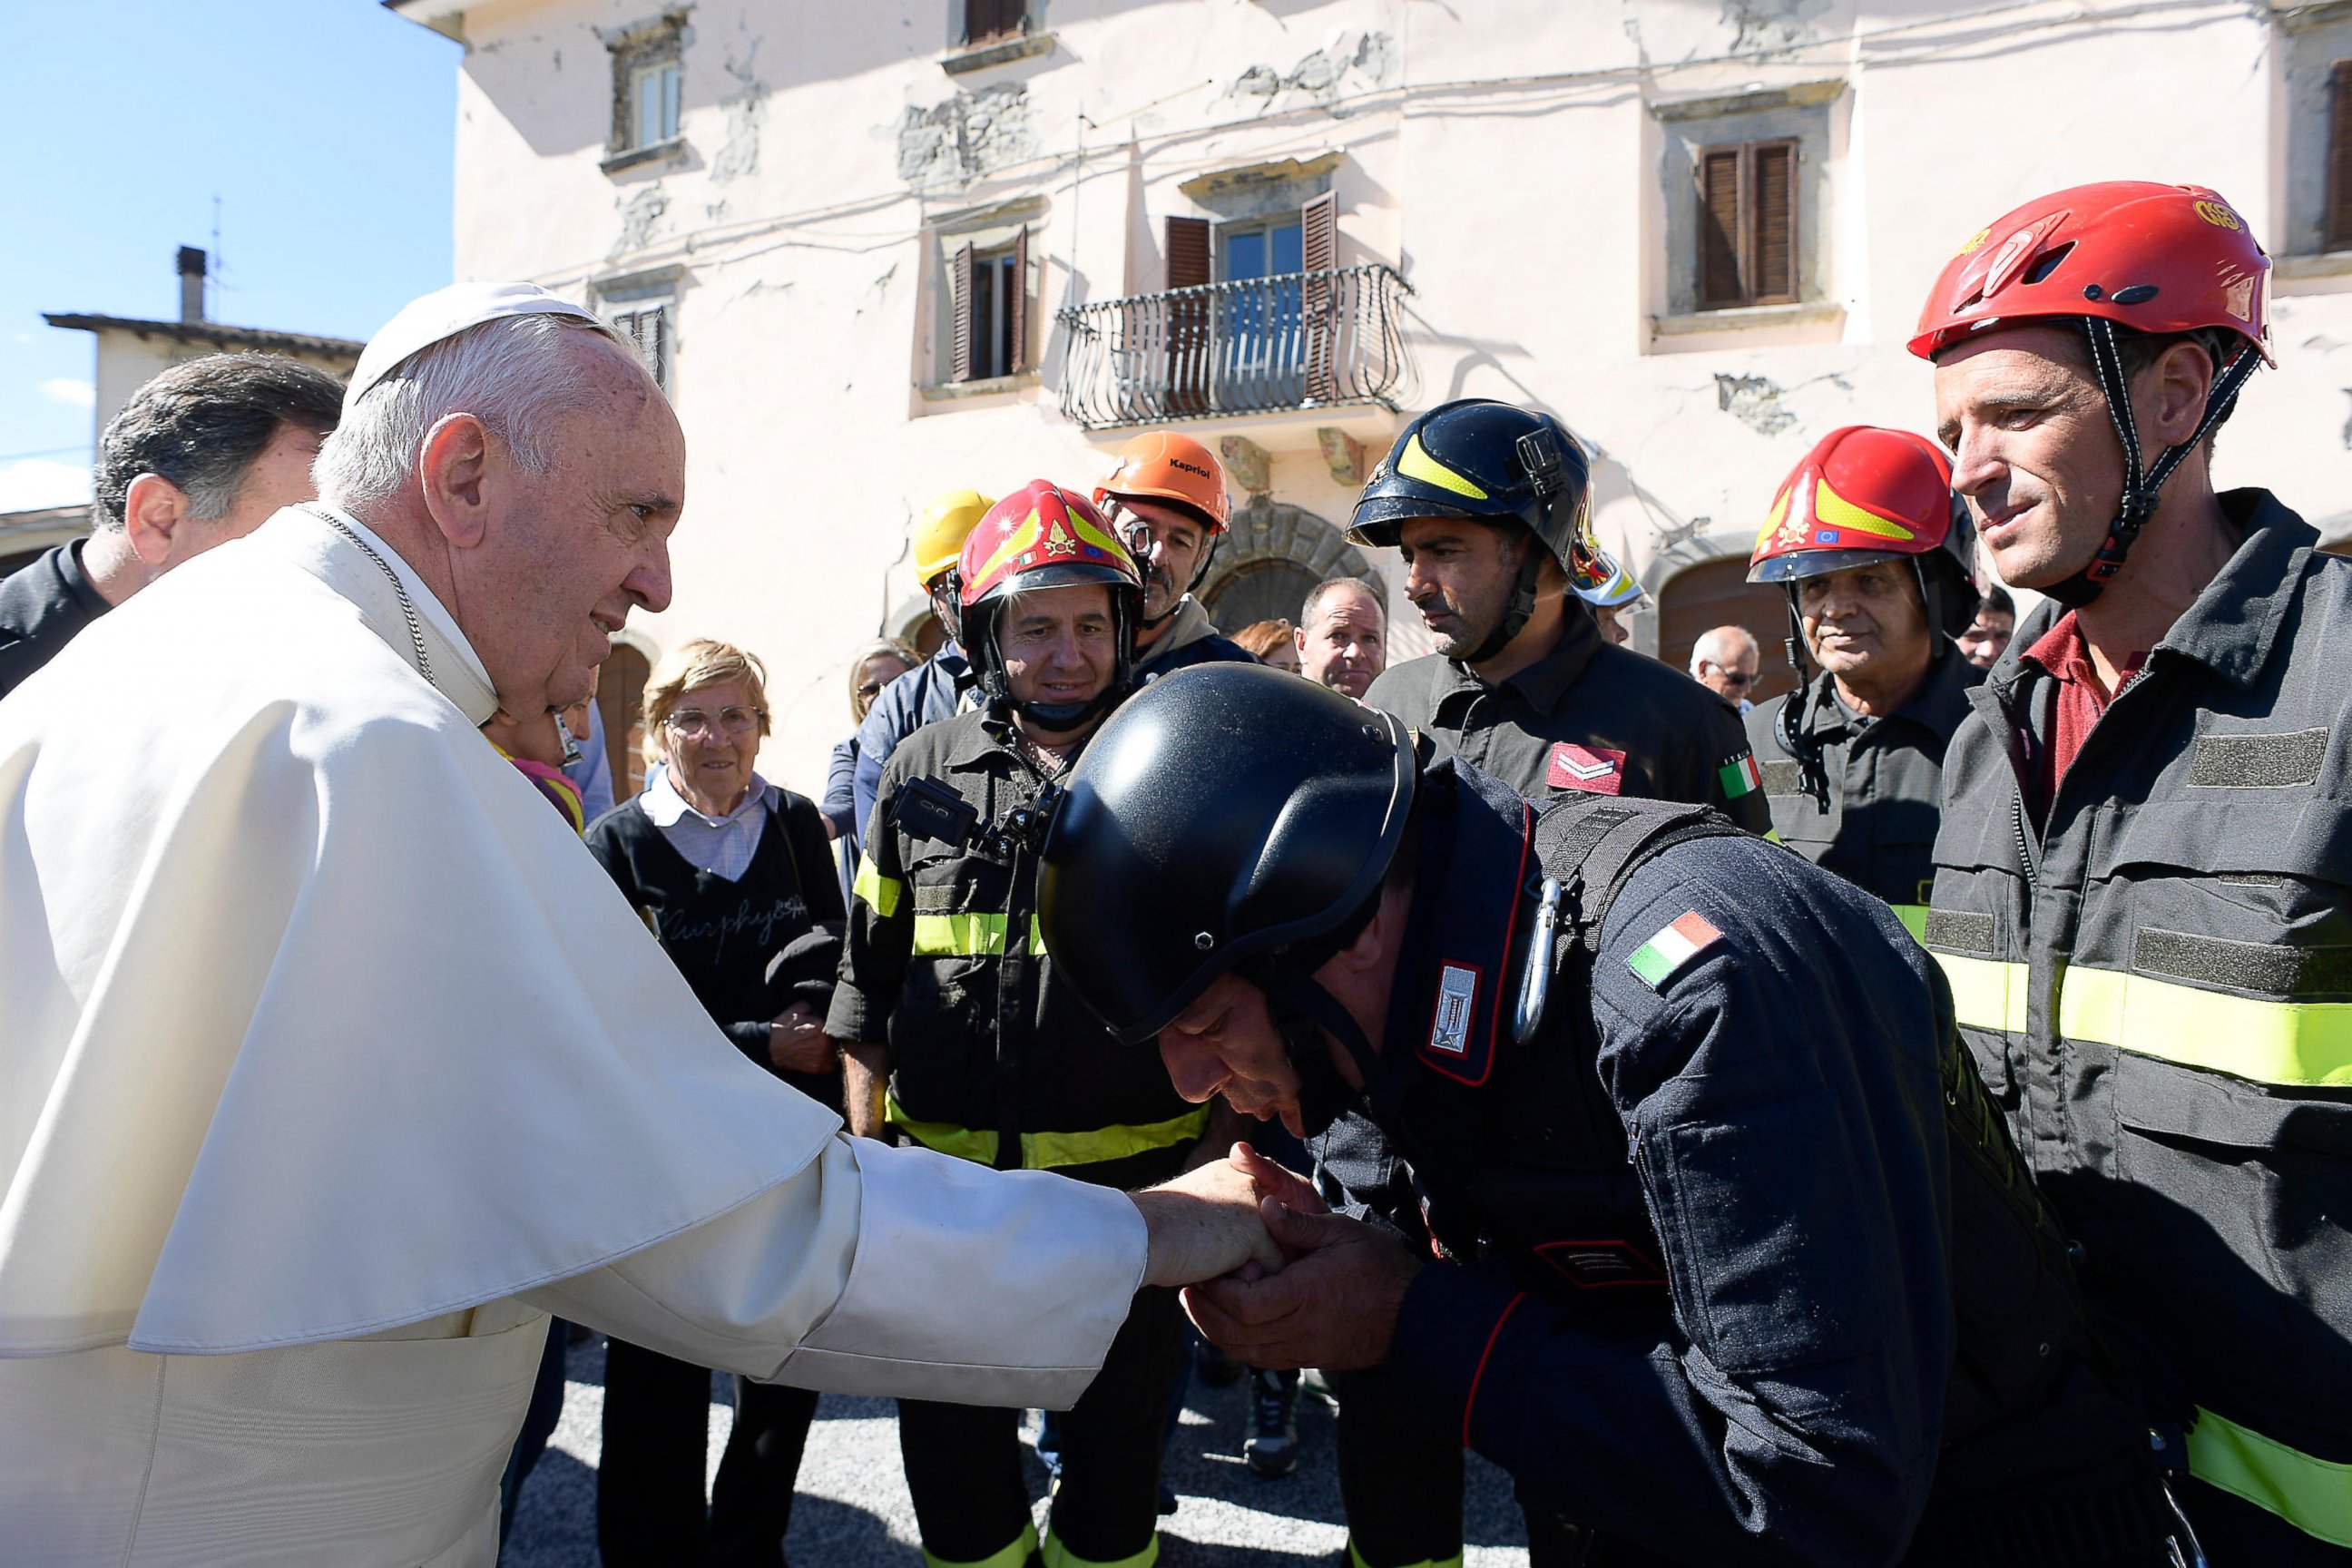 PHOTO: A Carabiniere paramilitary police officer kisses Pope Francis' hand in the village of Accumoli, Italy, Oct. 4, 2016. 